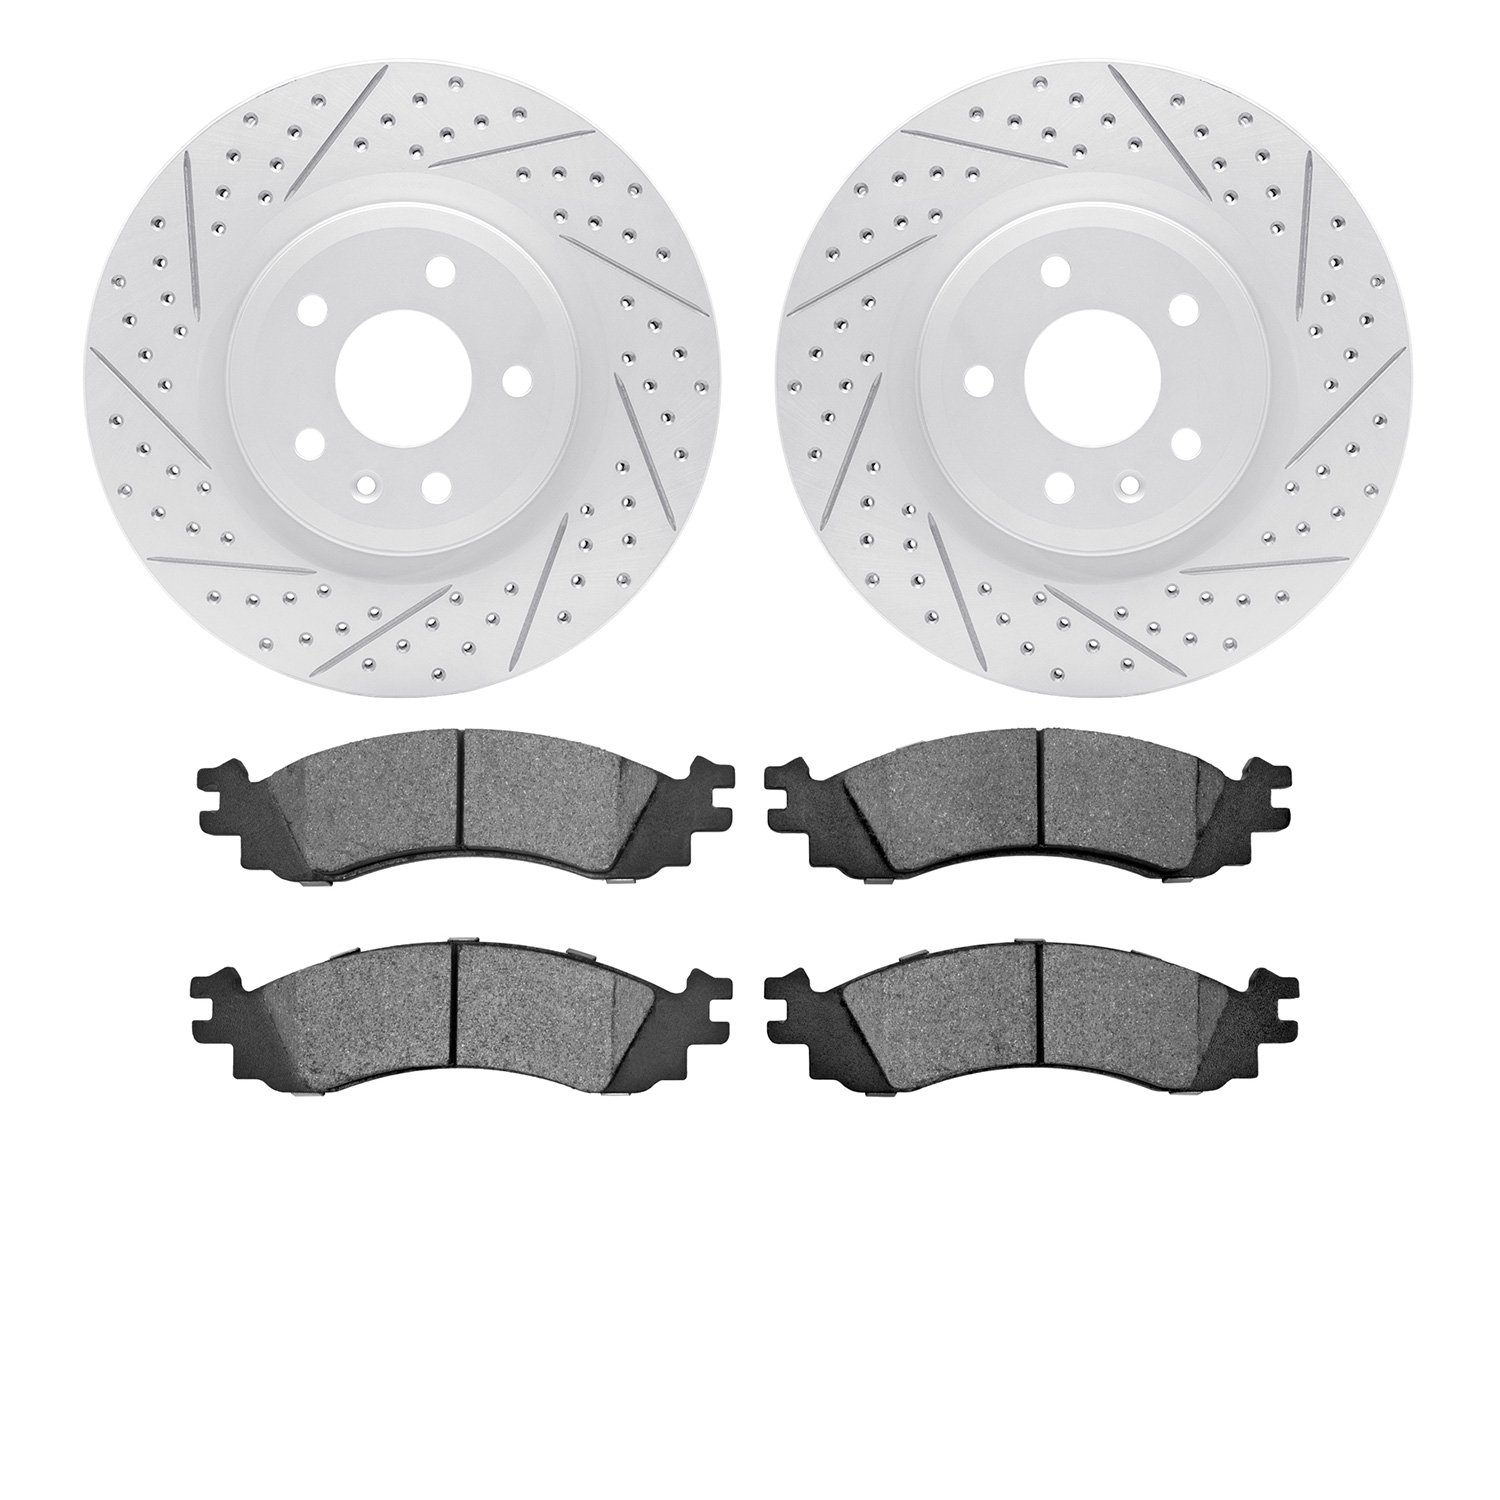 2202-54004 Geoperformance Drilled/Slotted Rotors w/Heavy-Duty Pads Kit, 2011-2012 Ford/Lincoln/Mercury/Mazda, Position: Front